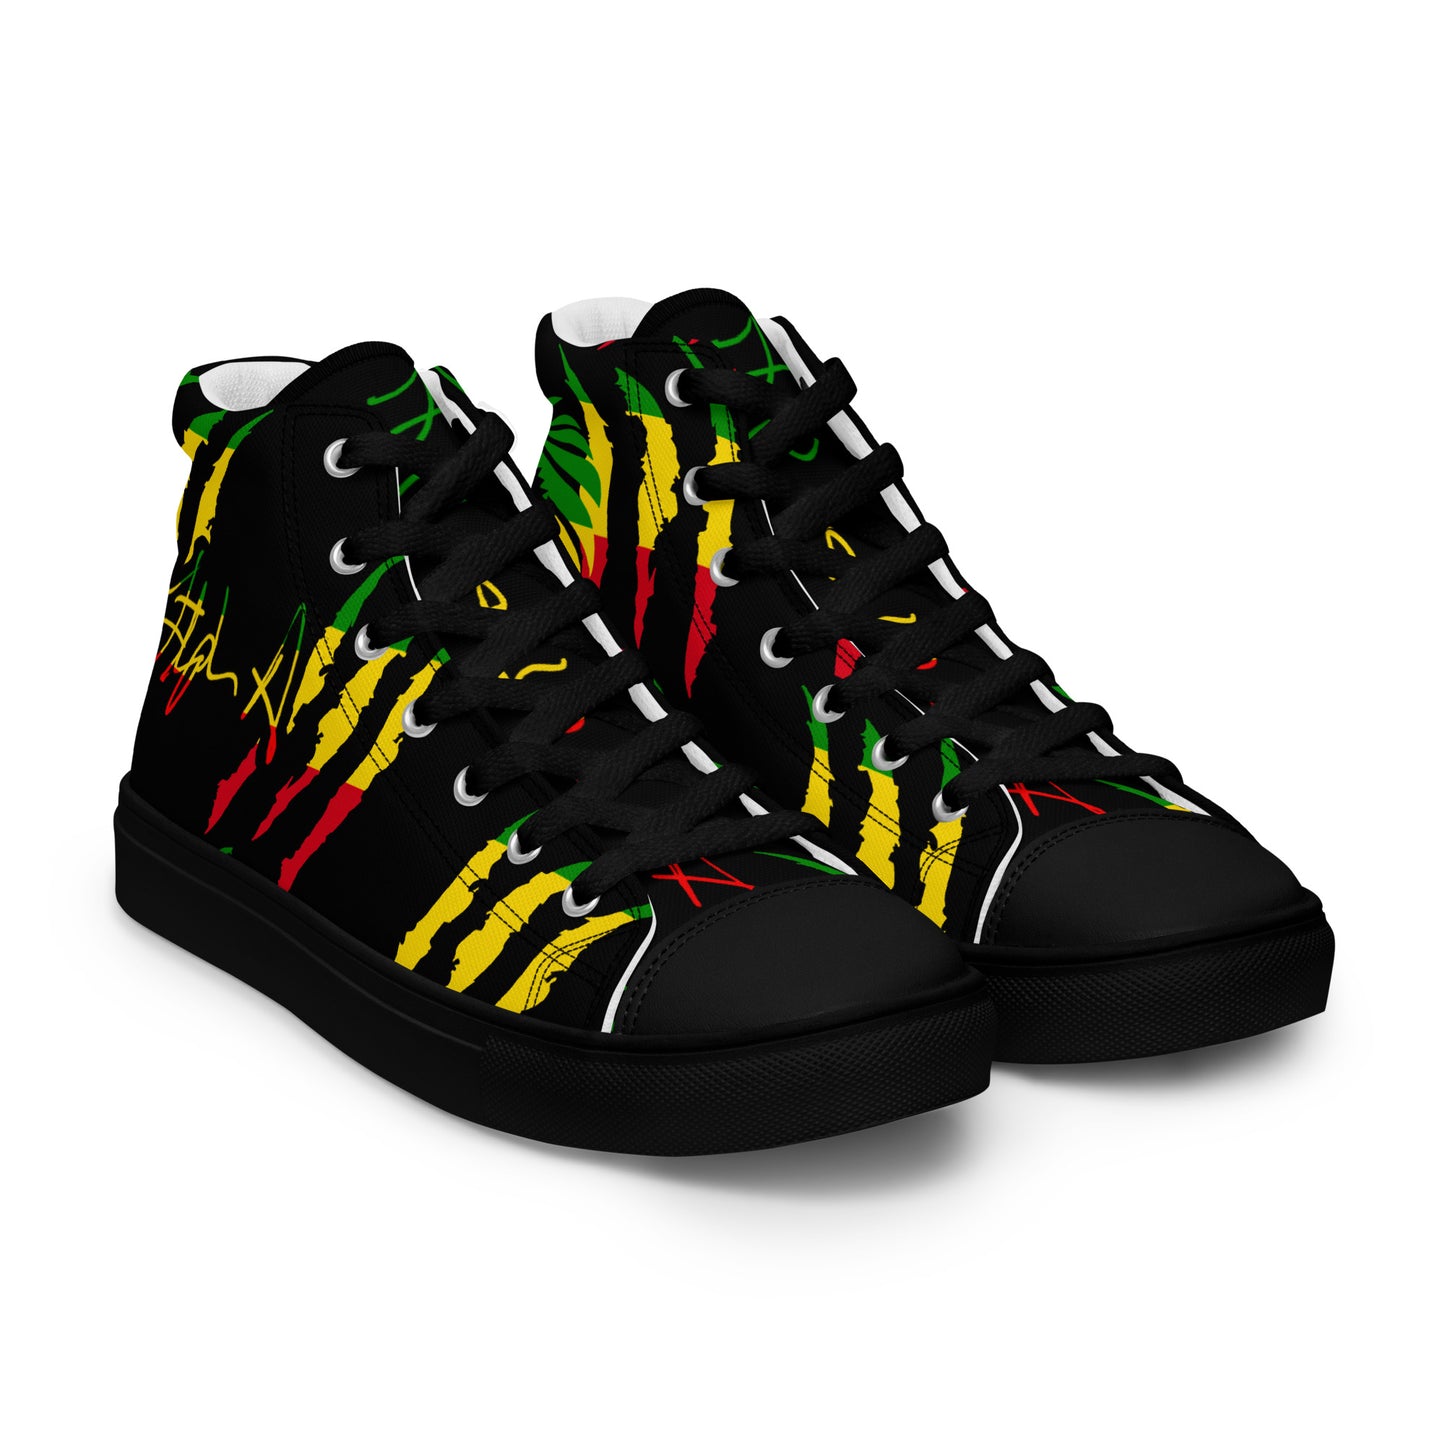 Red Gold and Green Women’s high top Signature shoes by Iamstephenallen